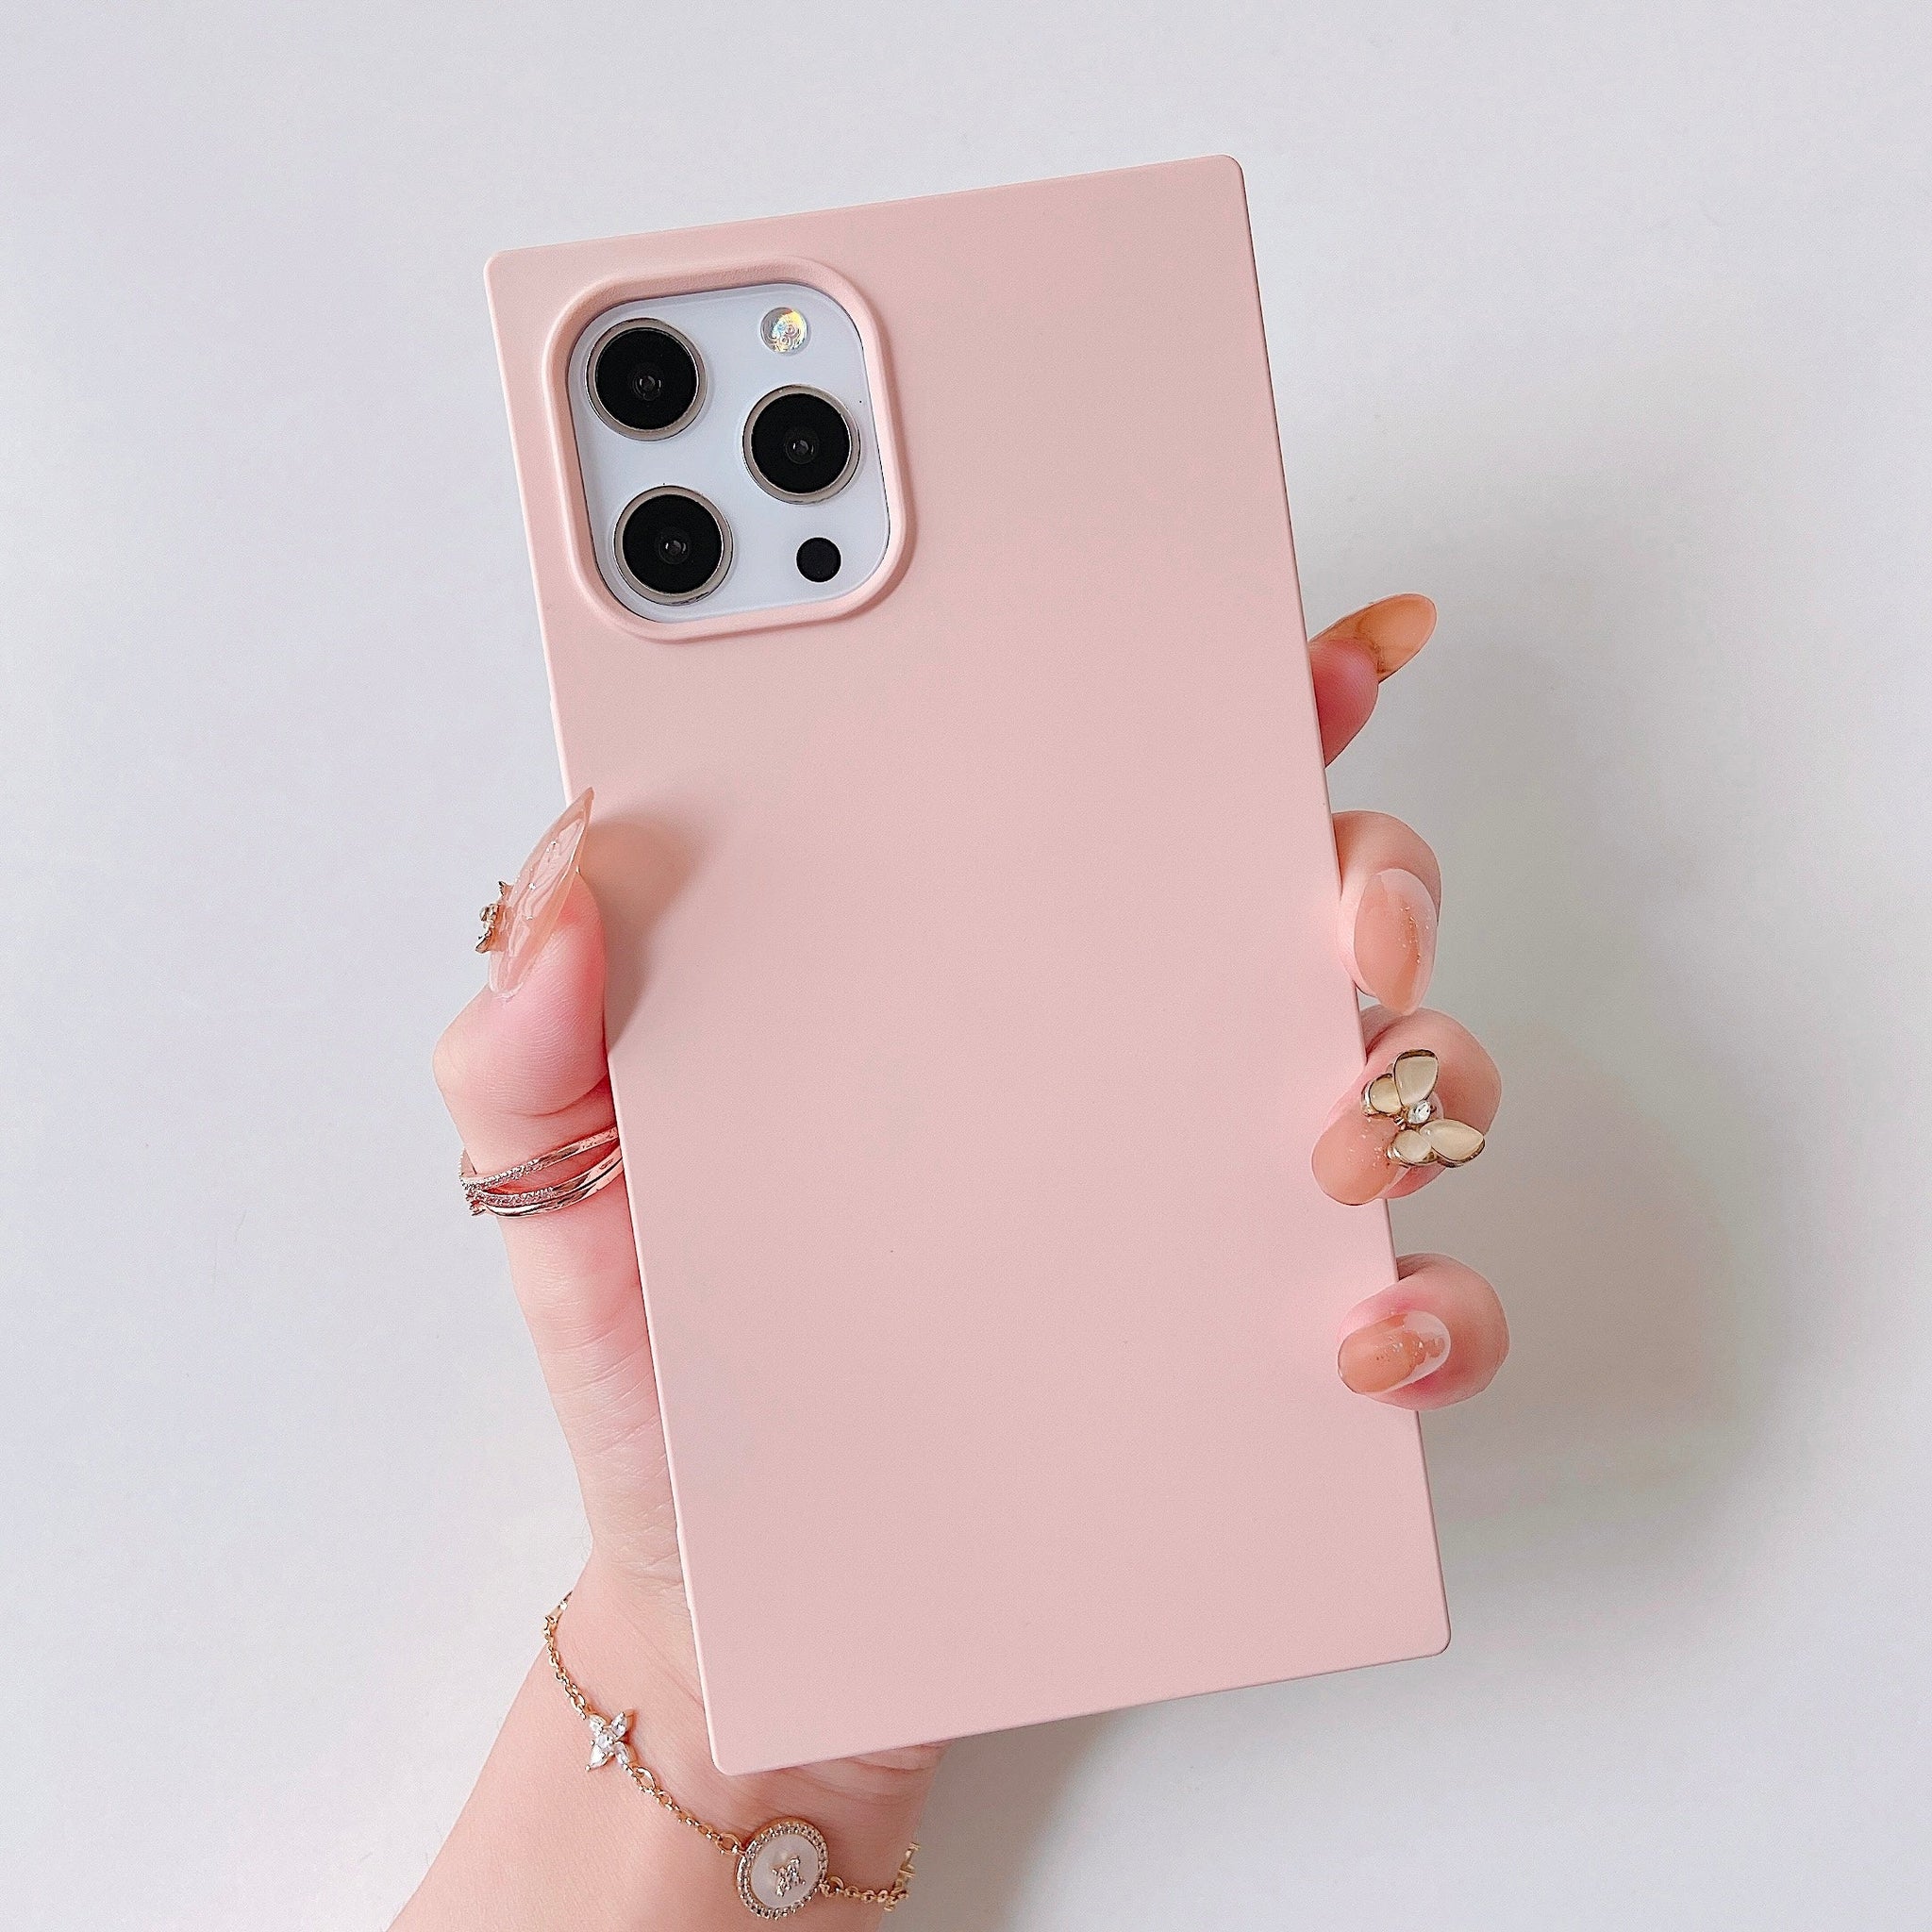 iPhone 12 Pro Max Case Square Silicone (Chalk Pink)